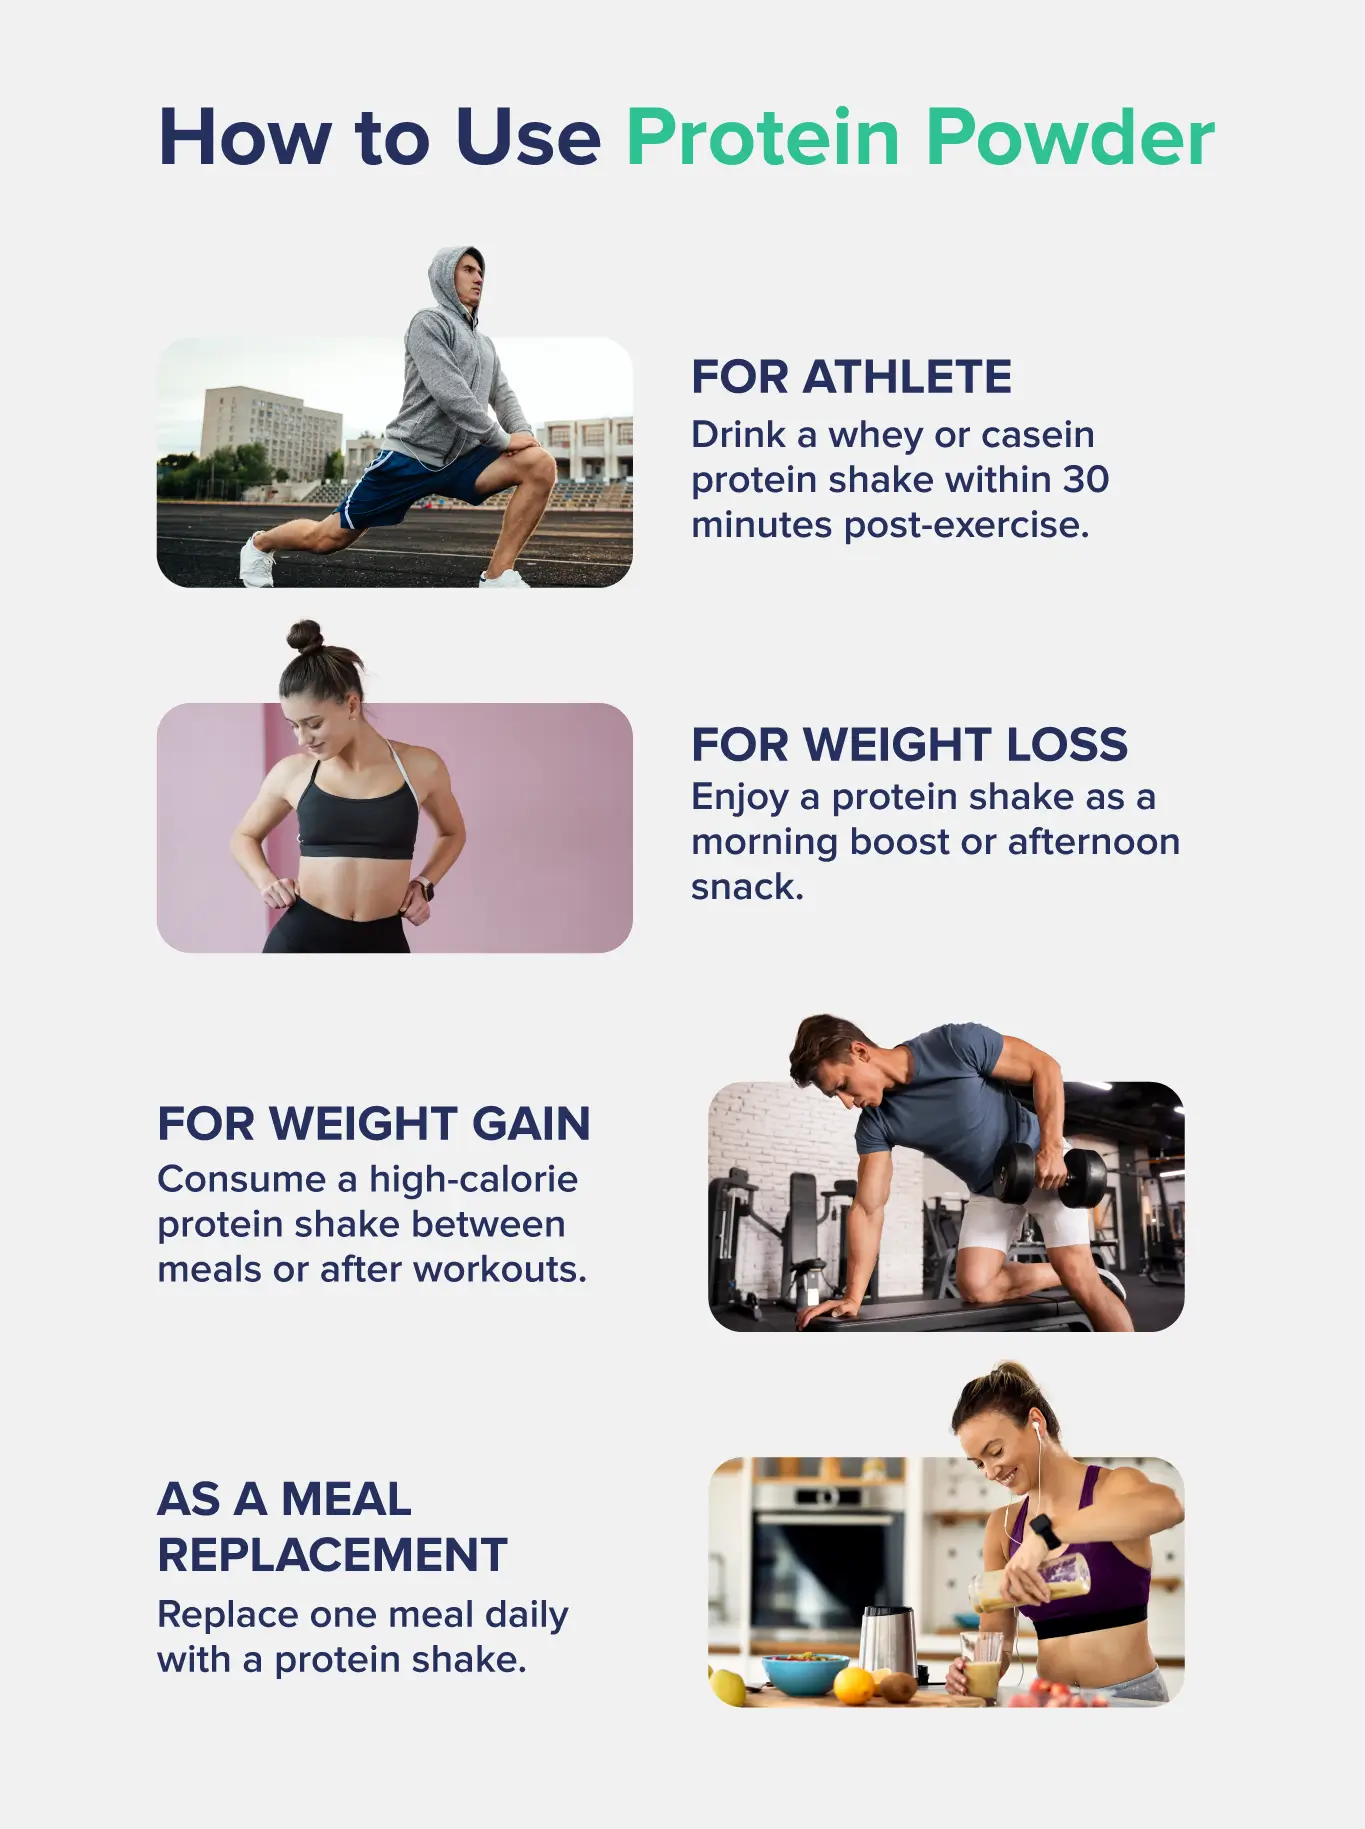 A graphic entitled "How to Use Protein Powder," listing steps like "drink a shake within 30 minutes post-exercise," "enjoy a protein shake as an afternoon snack," and more with accompanying images. 